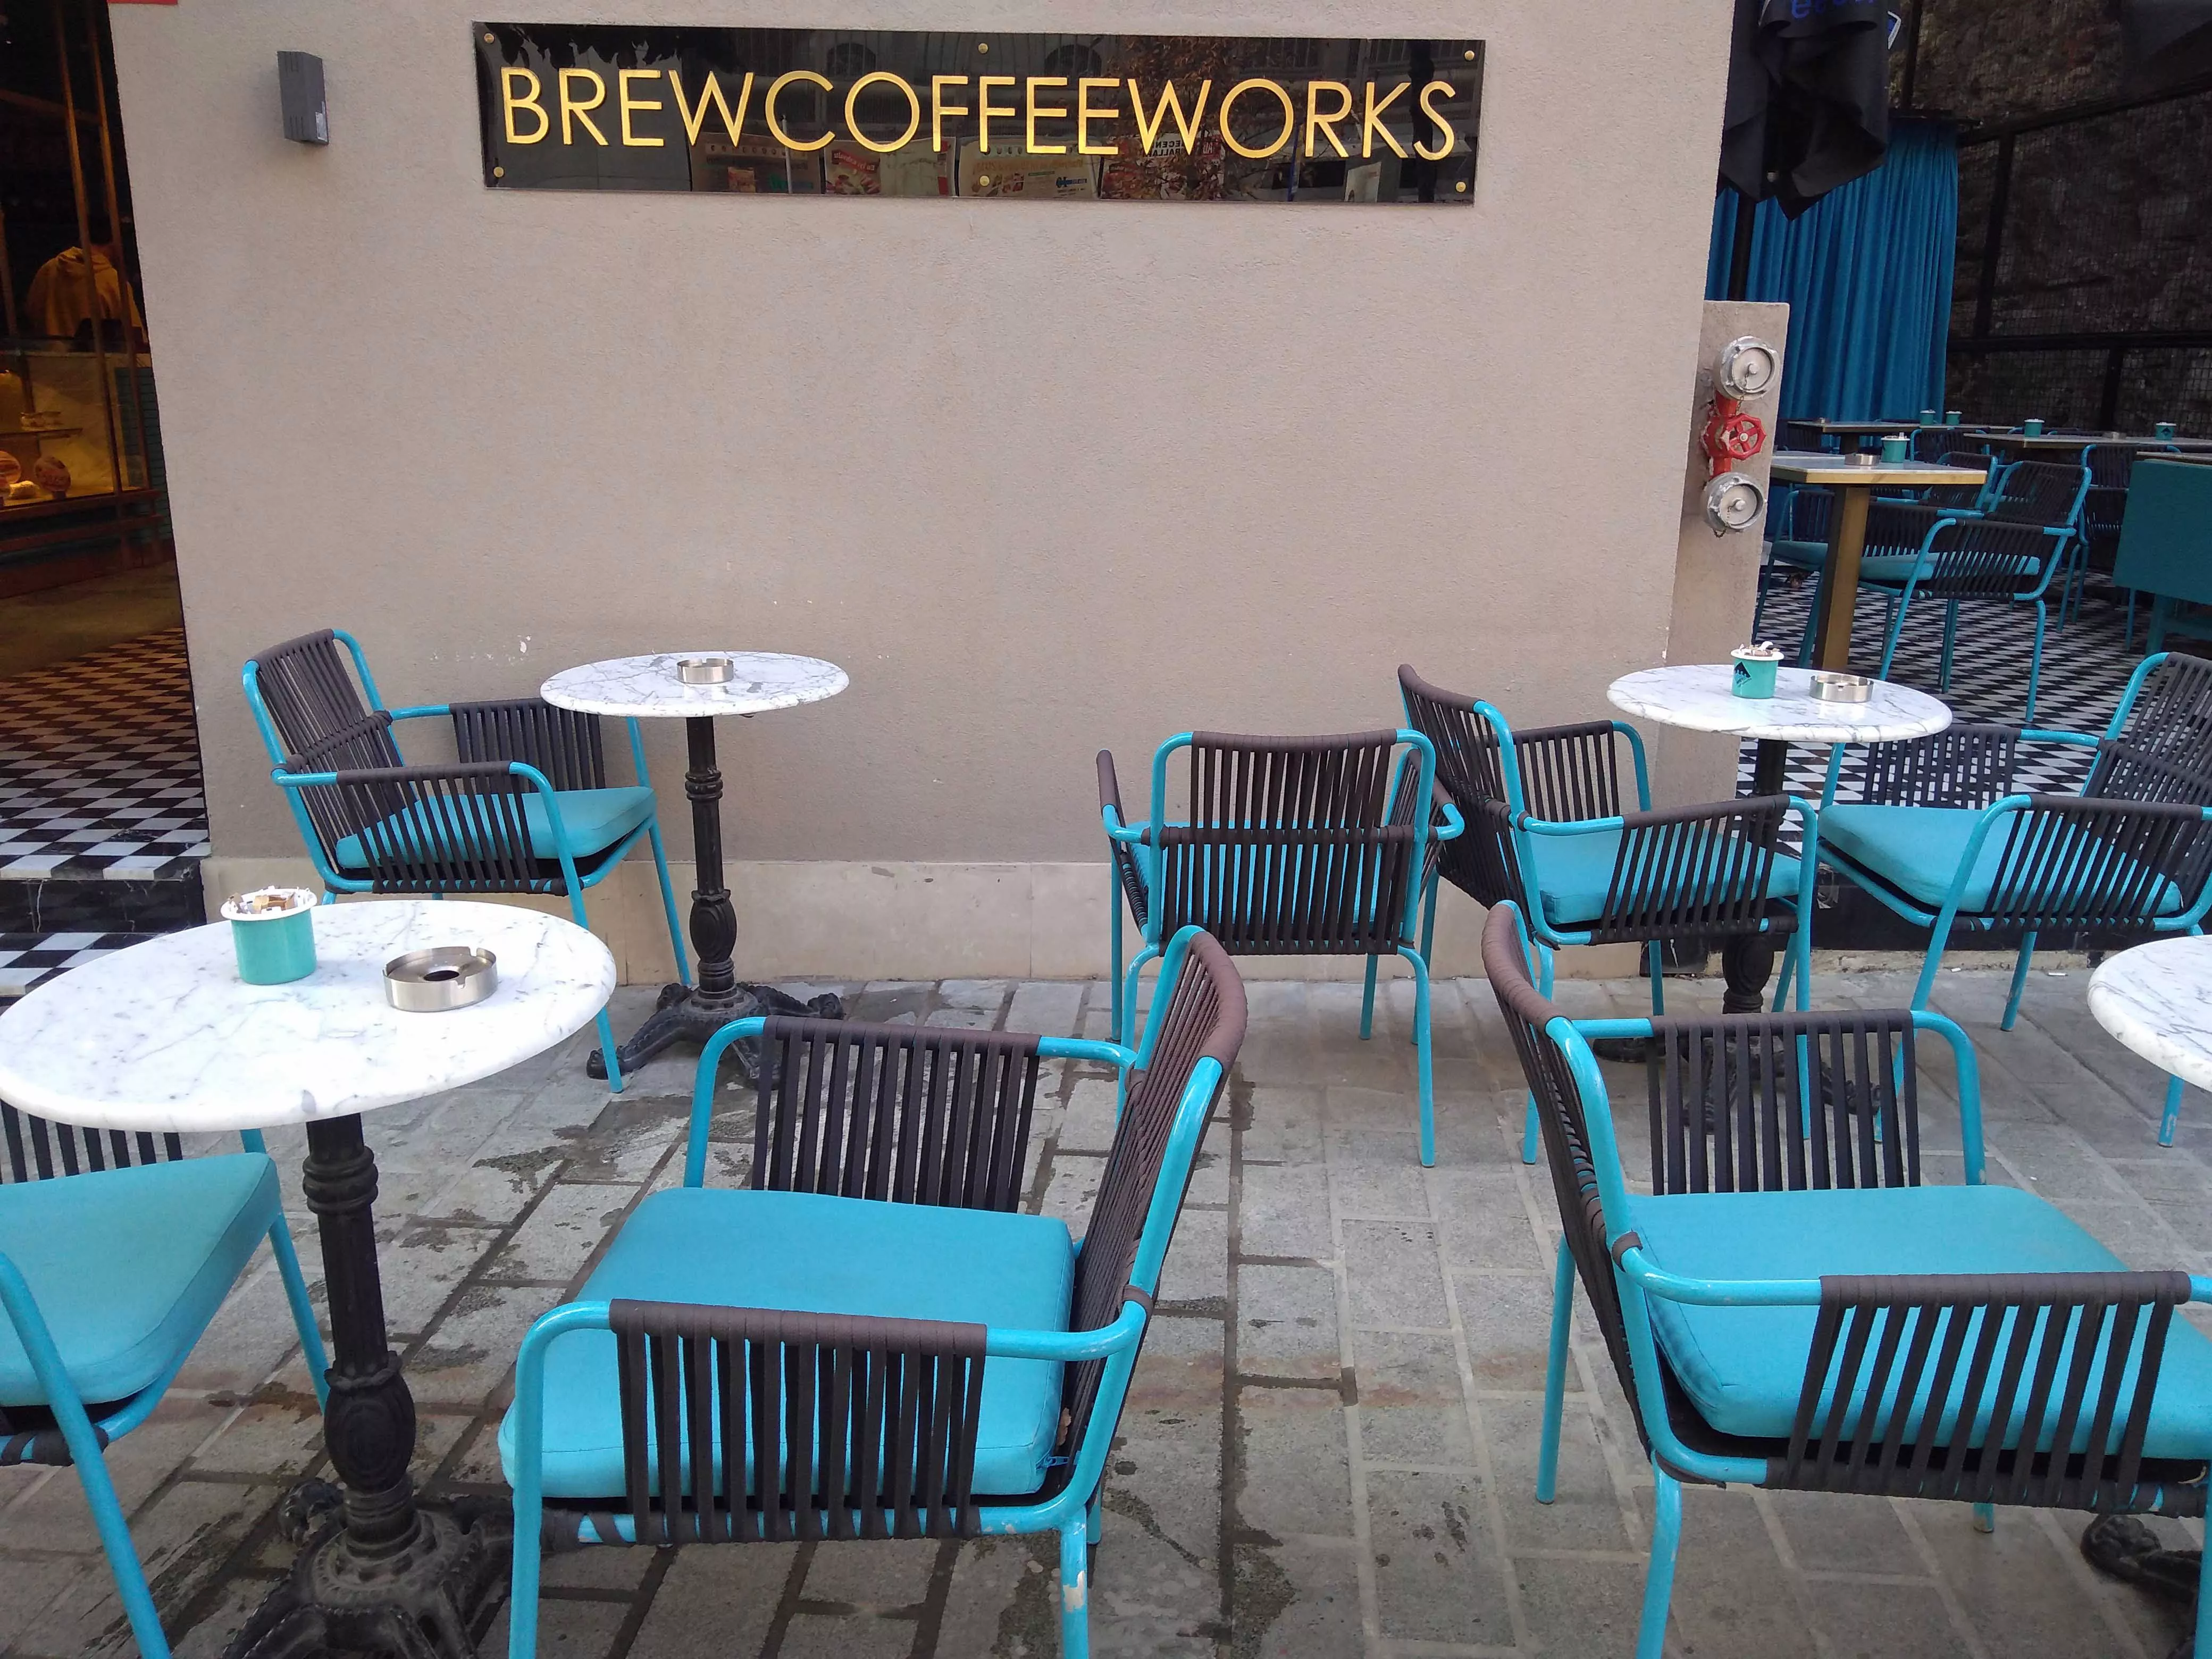 Brew Coffeeworks in Turkey, central_asia | Coffee - Country Helper